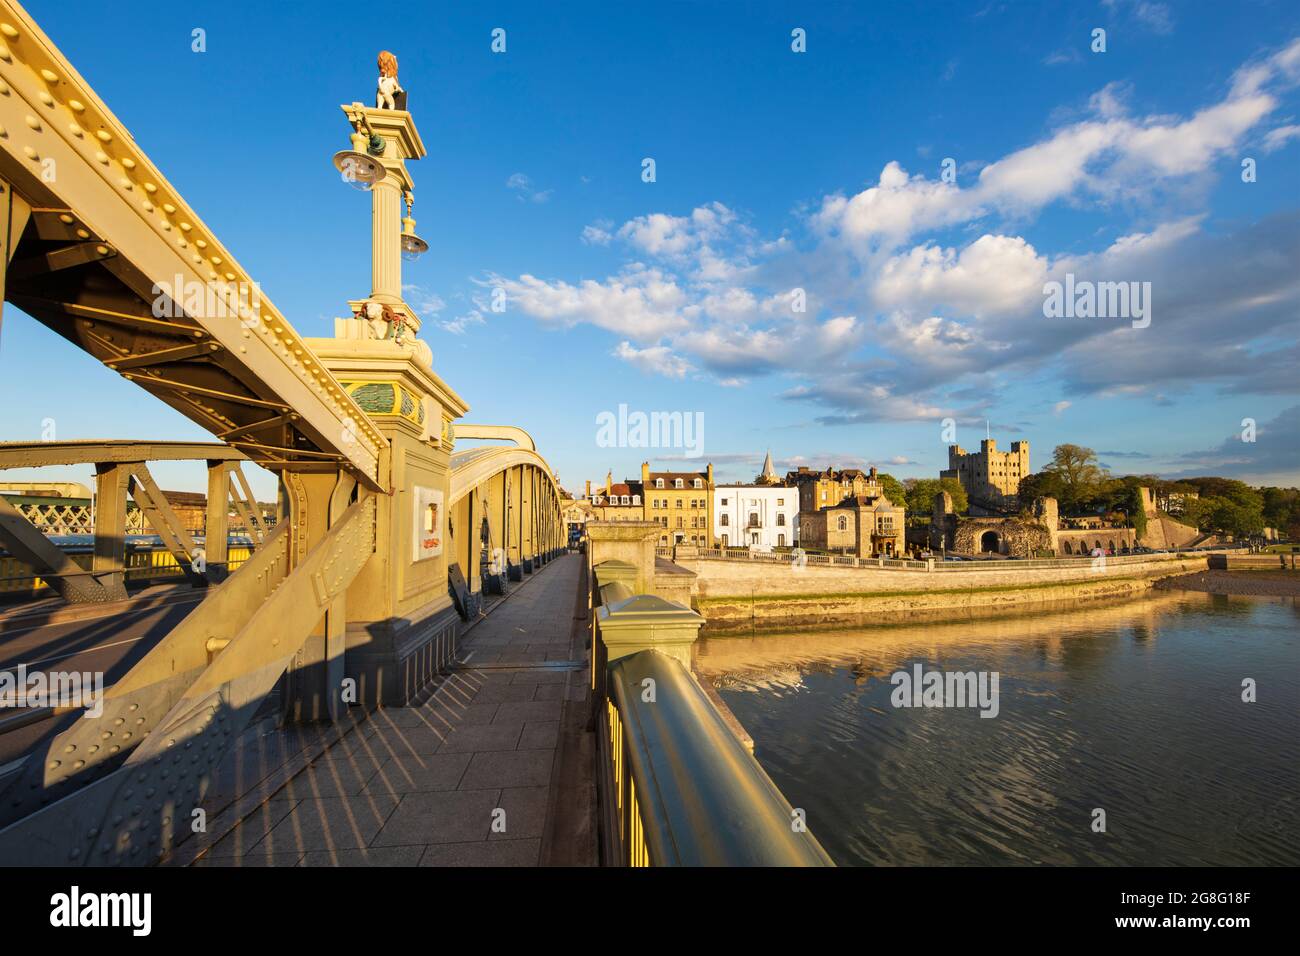 Rochester Bridge over the River Medway to the old town and Norman Castle, Rochester, Kent, England, United Kingdom, Europe Stock Photo